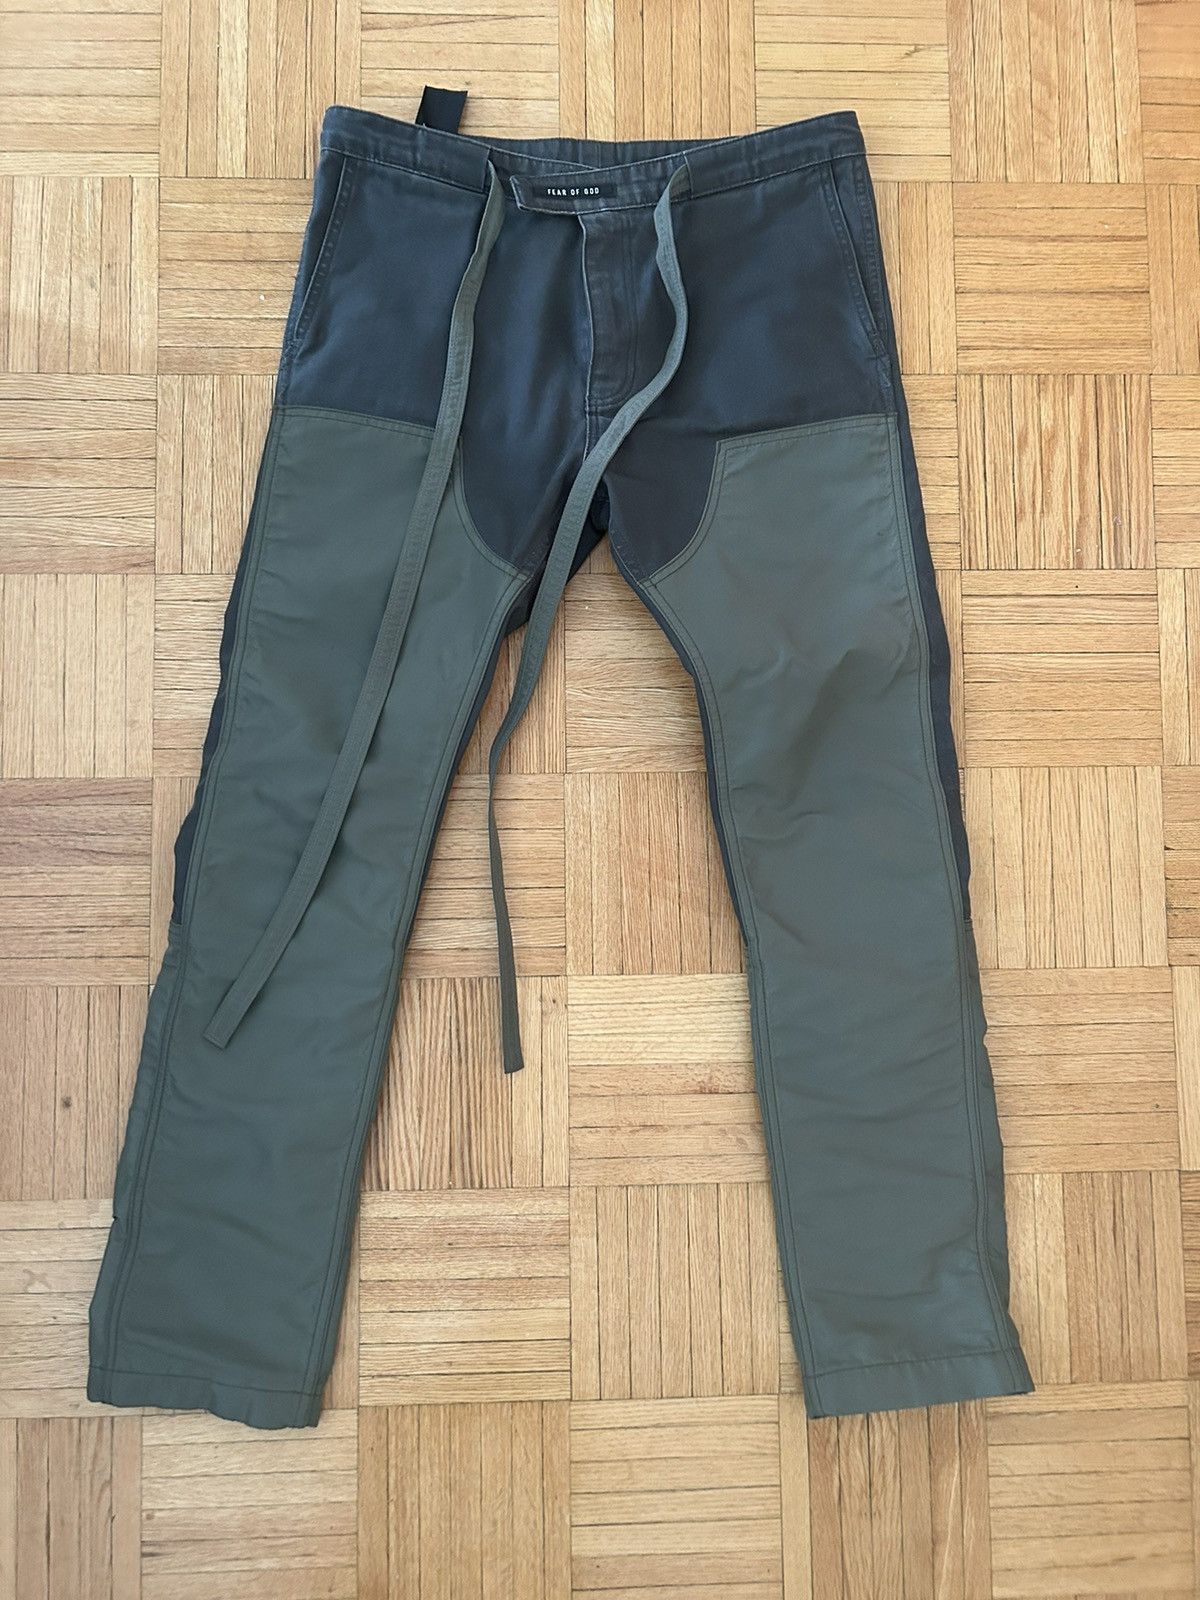 Fear of God Fear of god double front nylon pants M | Grailed